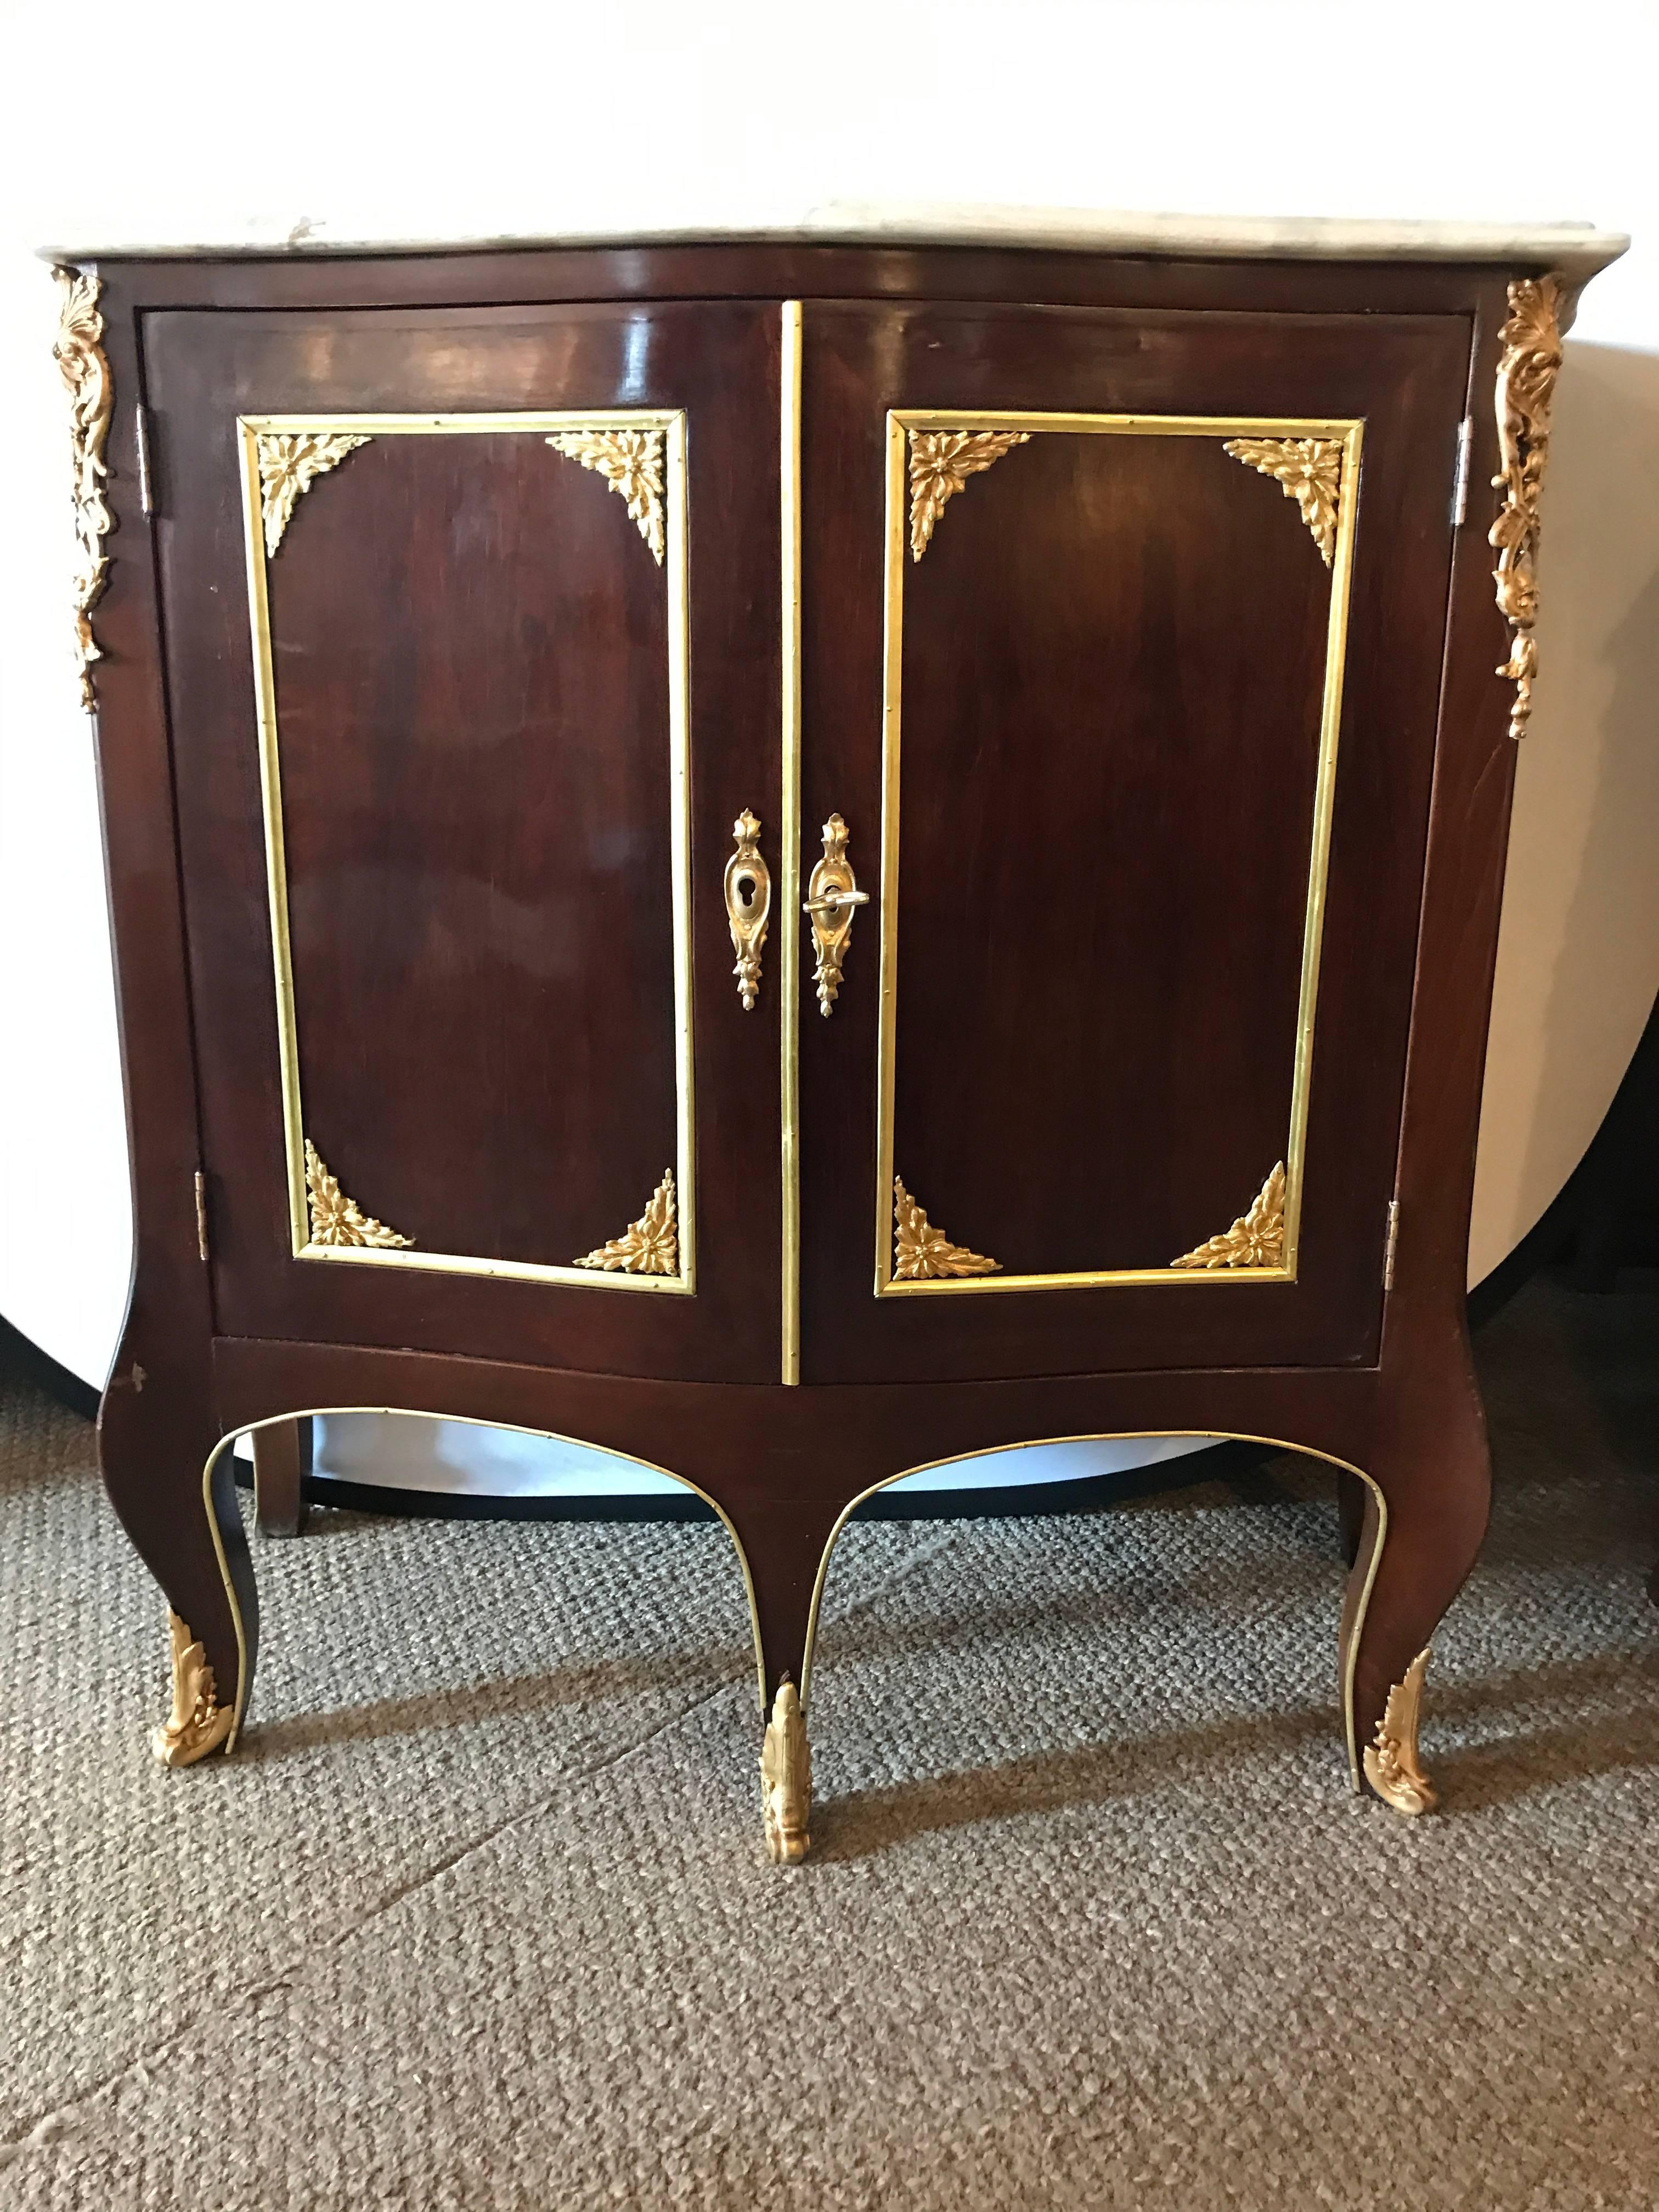 Pair of Jansen style oak interior two-door marble-top bedside cabinets or end tables which can easily be used as console tables. This finely constructed pair of end table or console tables have all over bronze mounts and are fashioned in the Louis